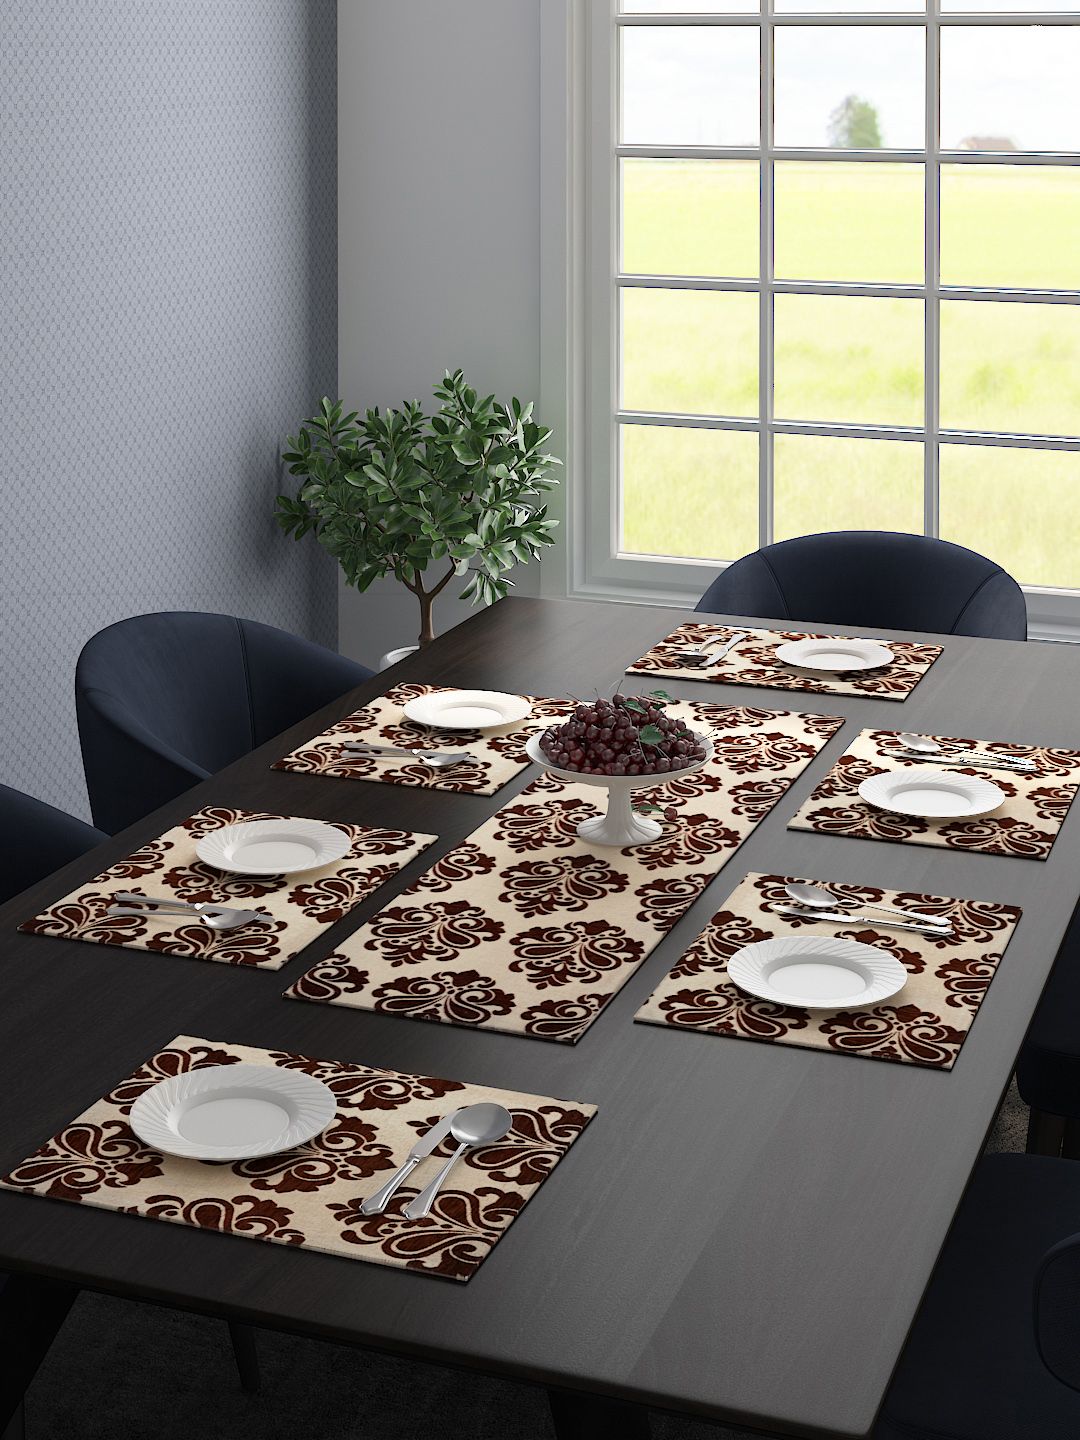 Saral Home Set Of 6 Printed Table Placemats & 1 Runner Price in India